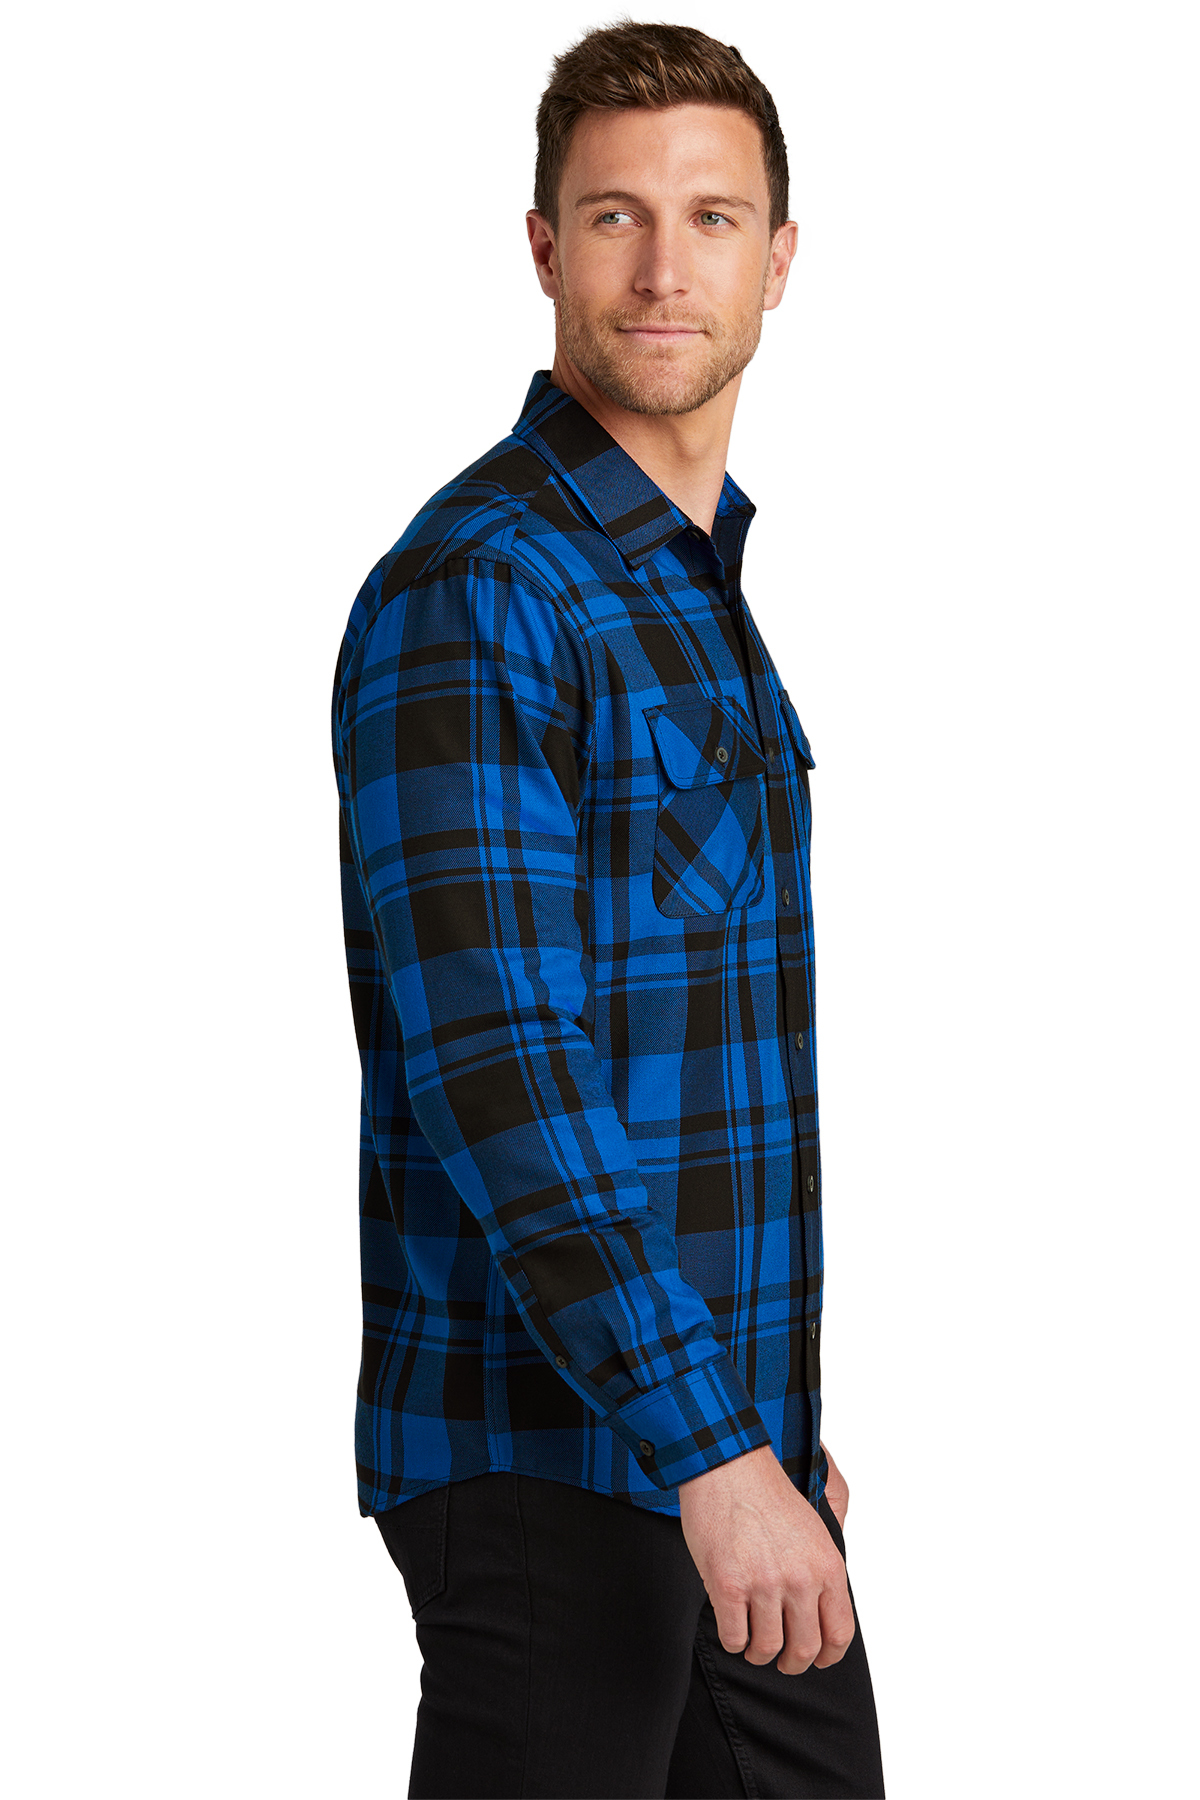 royal blue and black flannel shirt